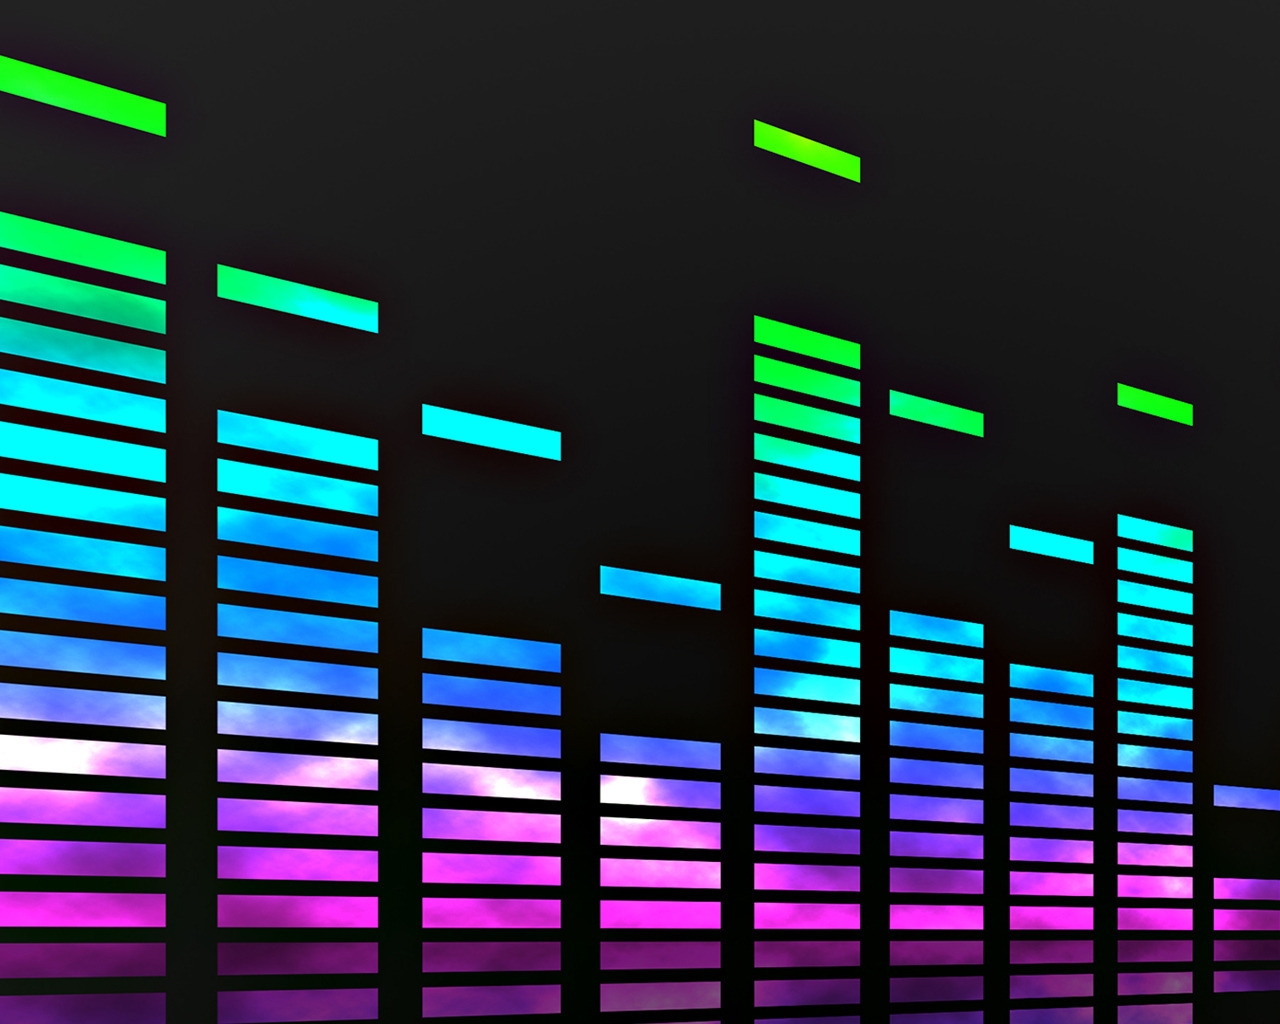 Colorful Equalizer for 1280 x 1024 resolution